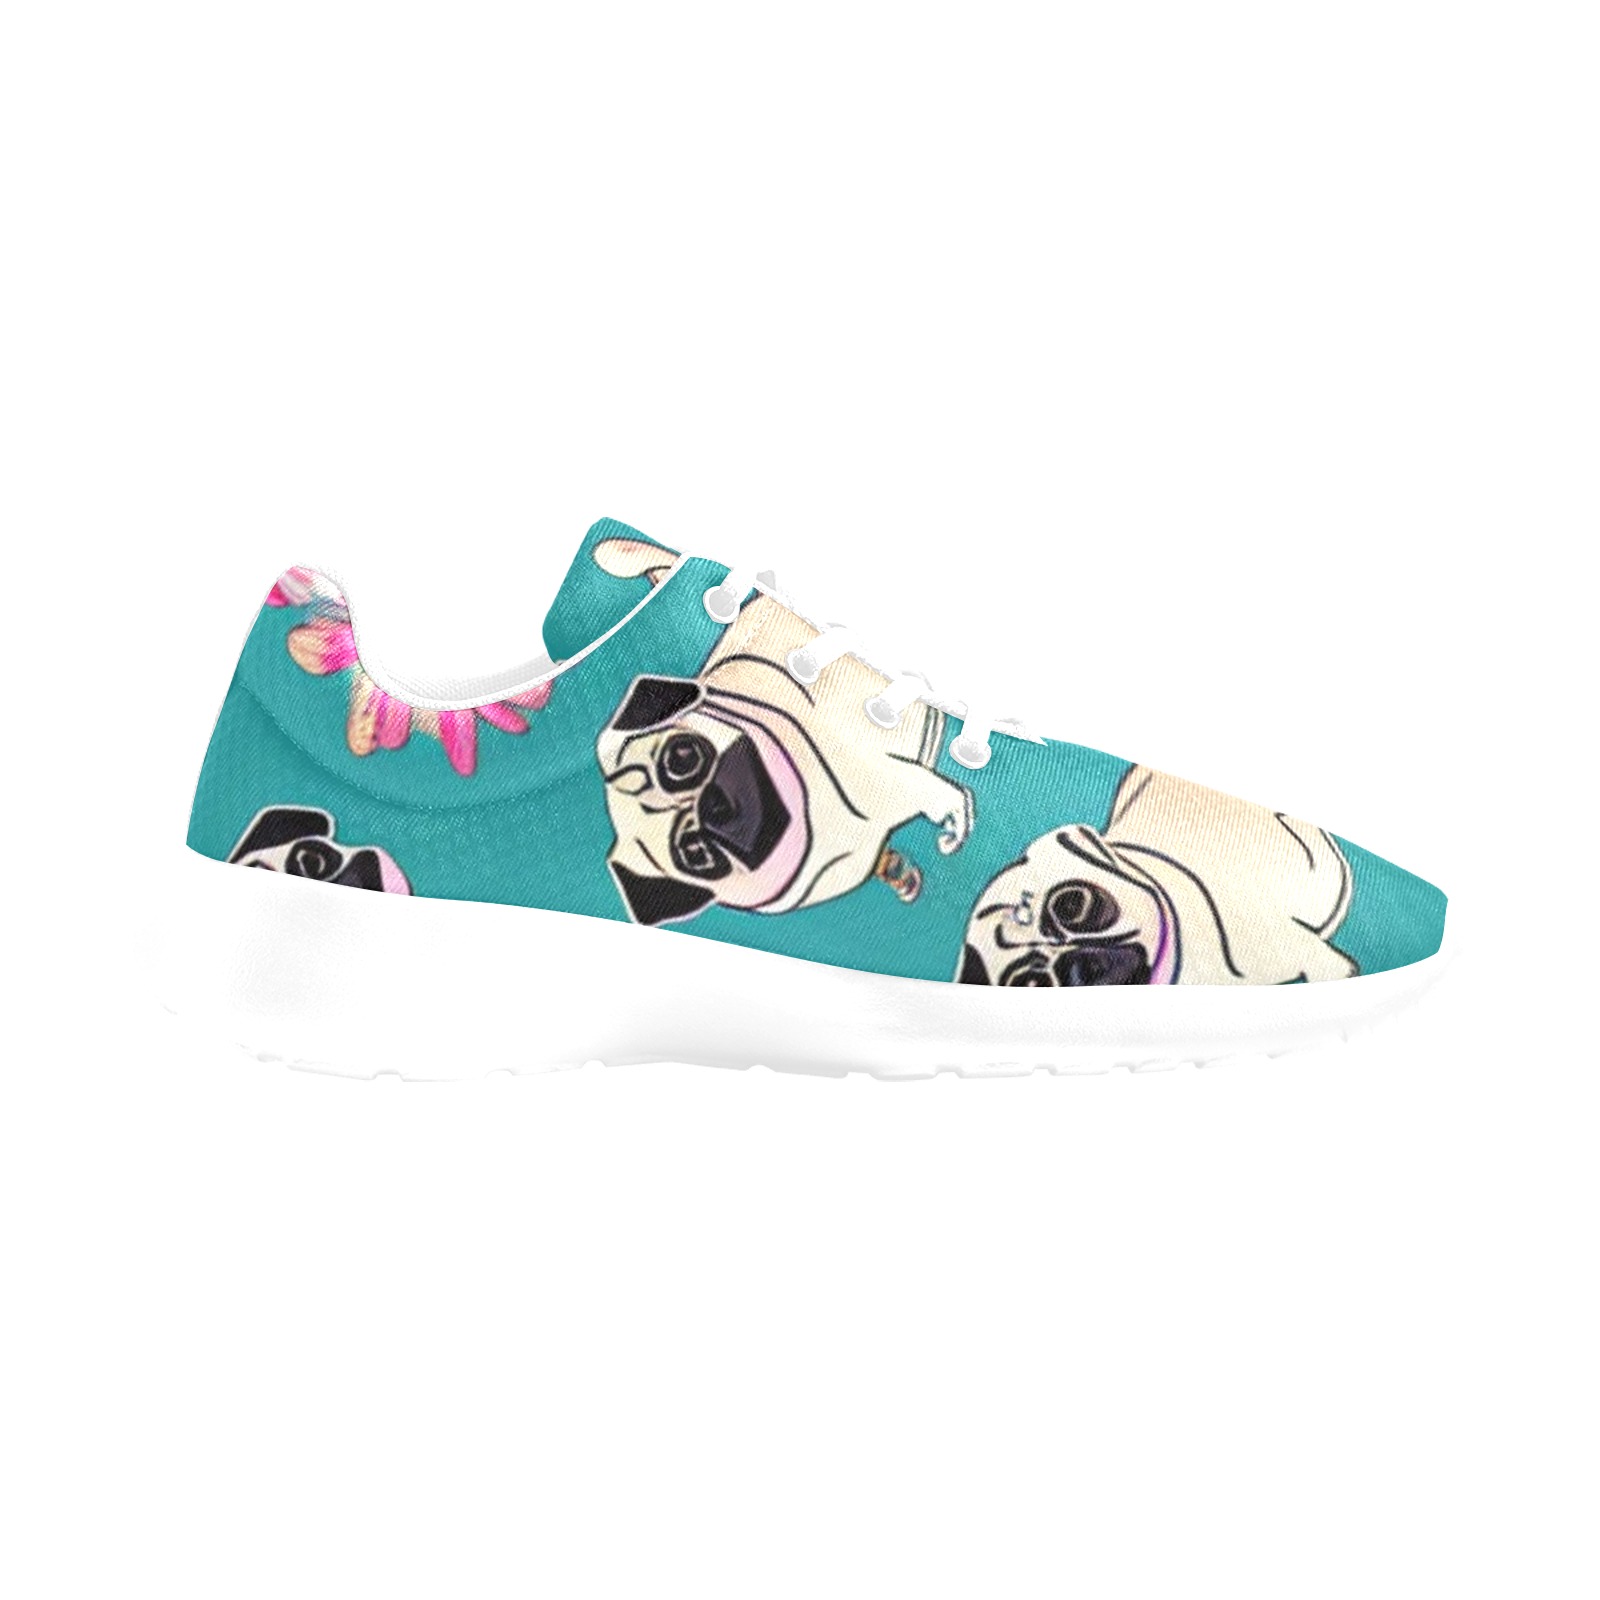 Pugs and Flowers 2 Women's Athletic Shoes (Model 0200)